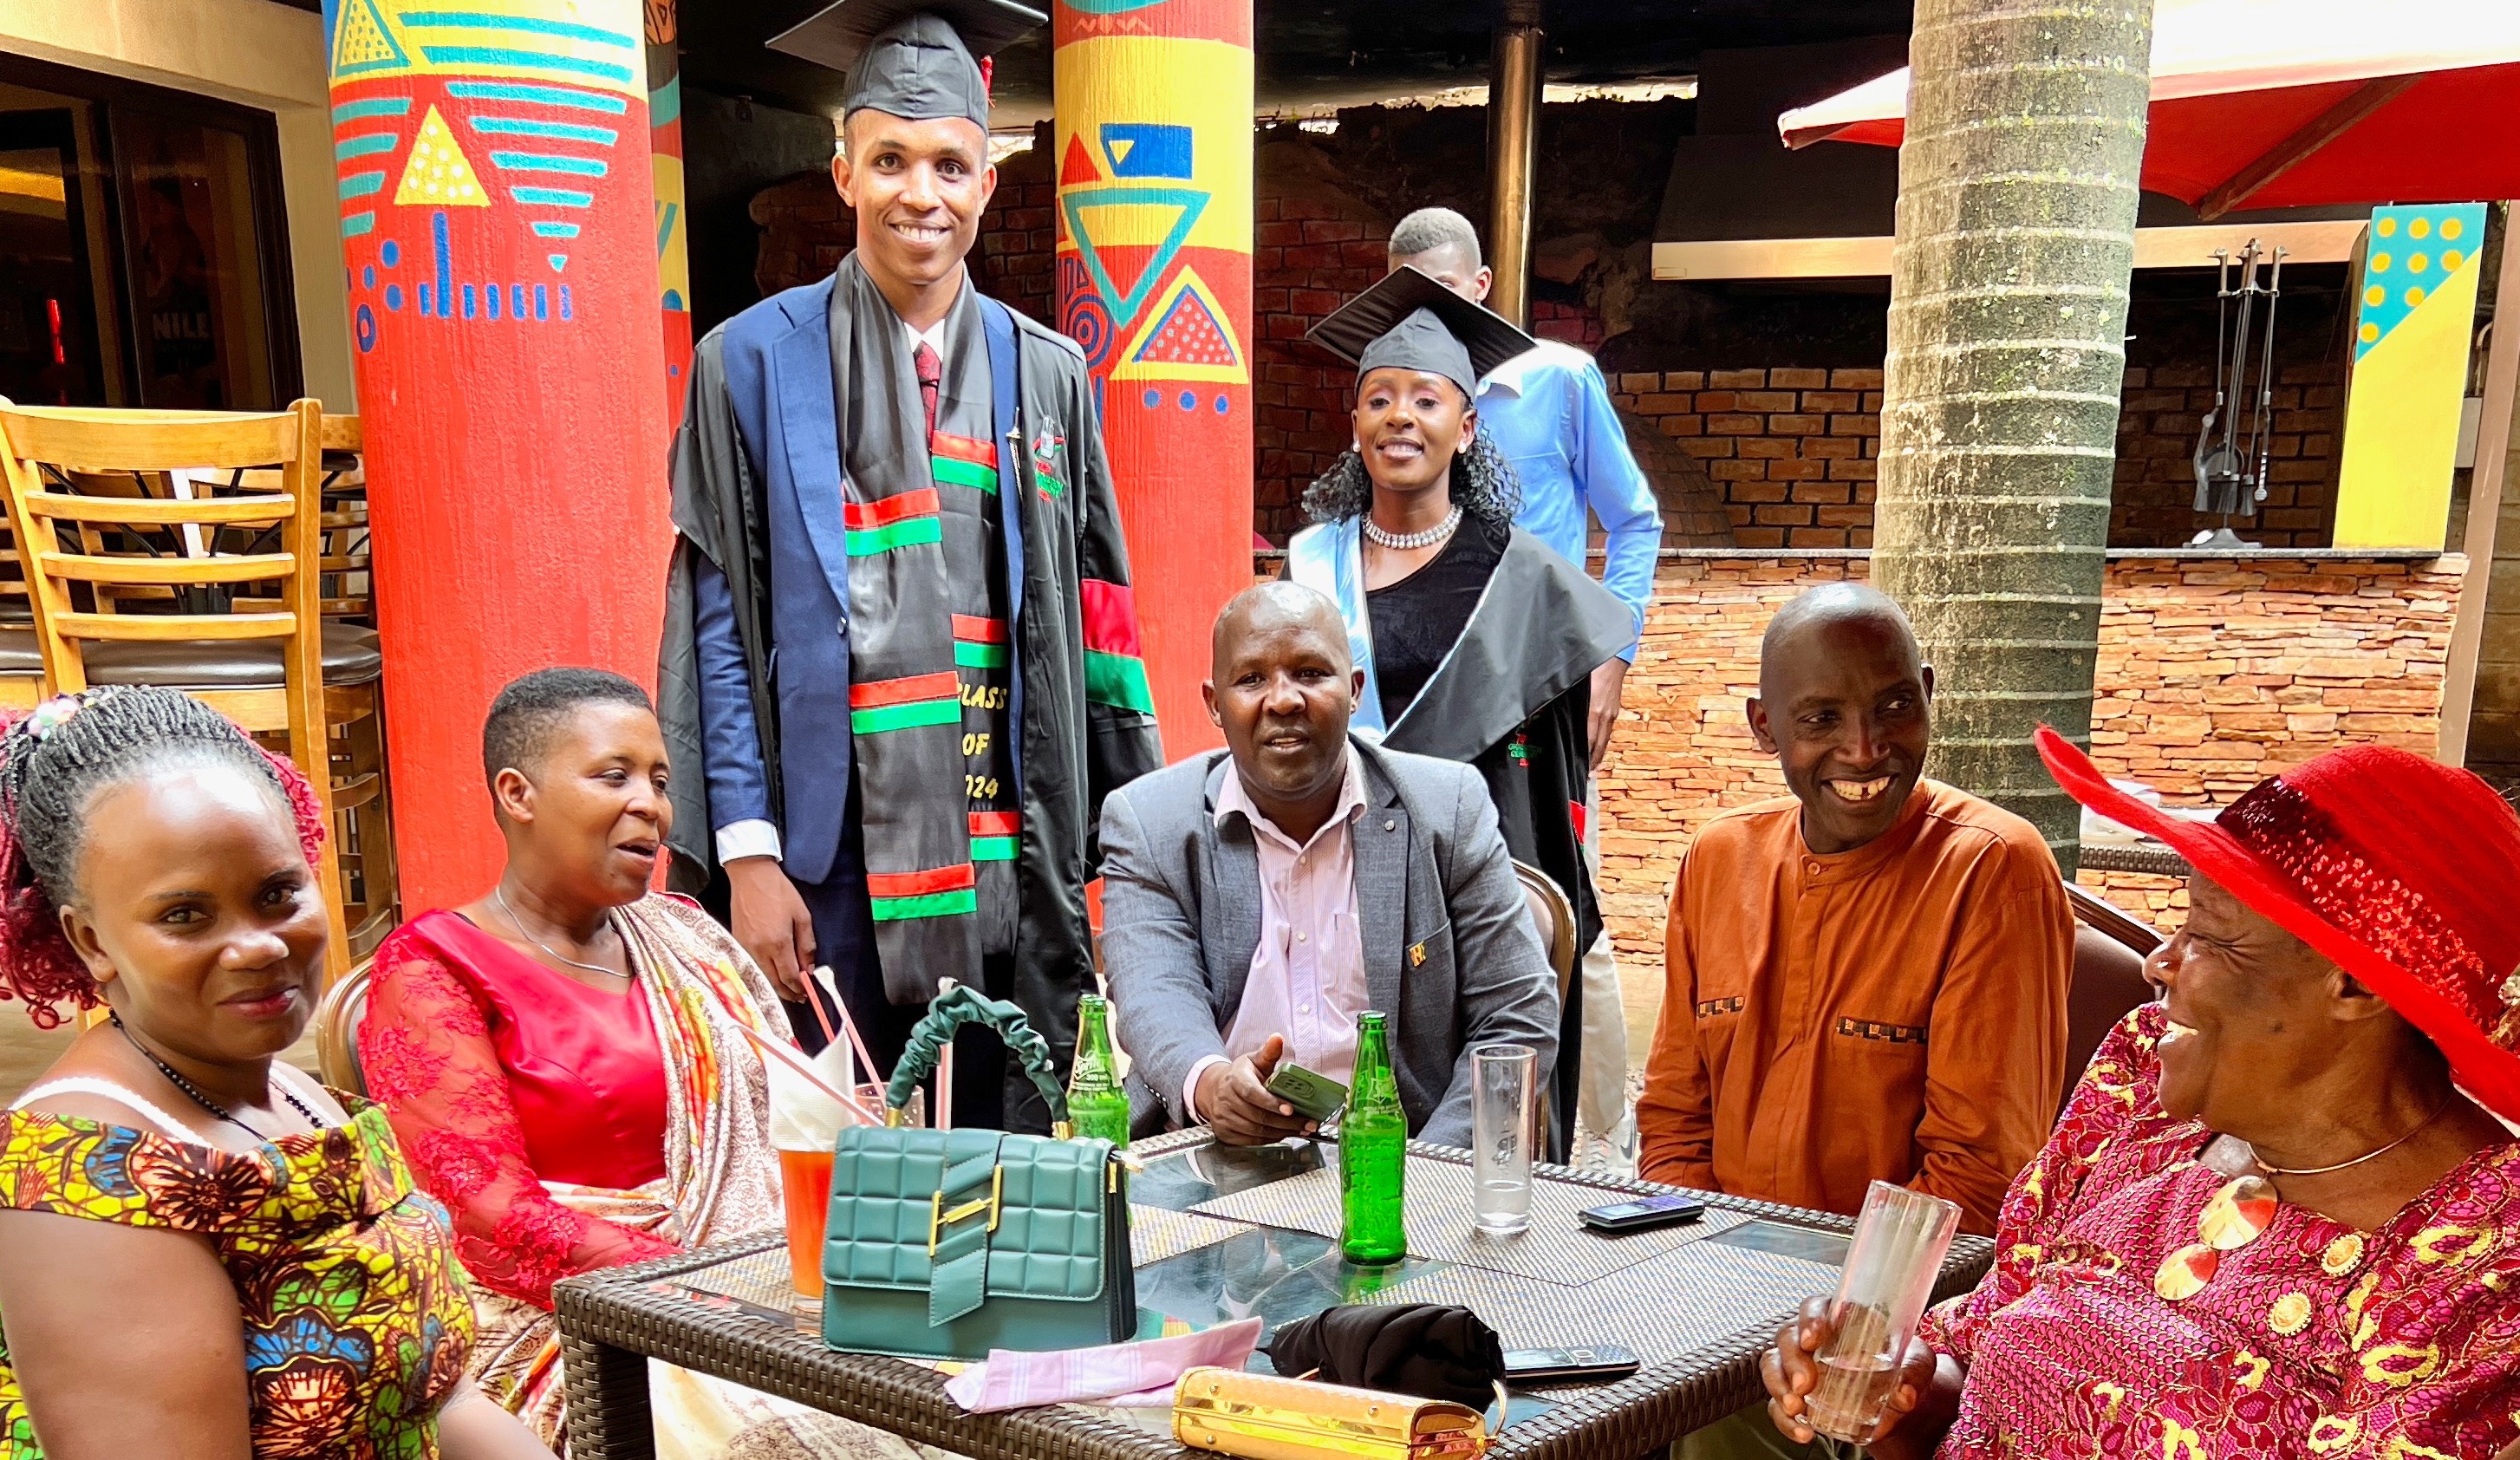 Colorful group of Ugandans—two dressed in graduation caps and gowns